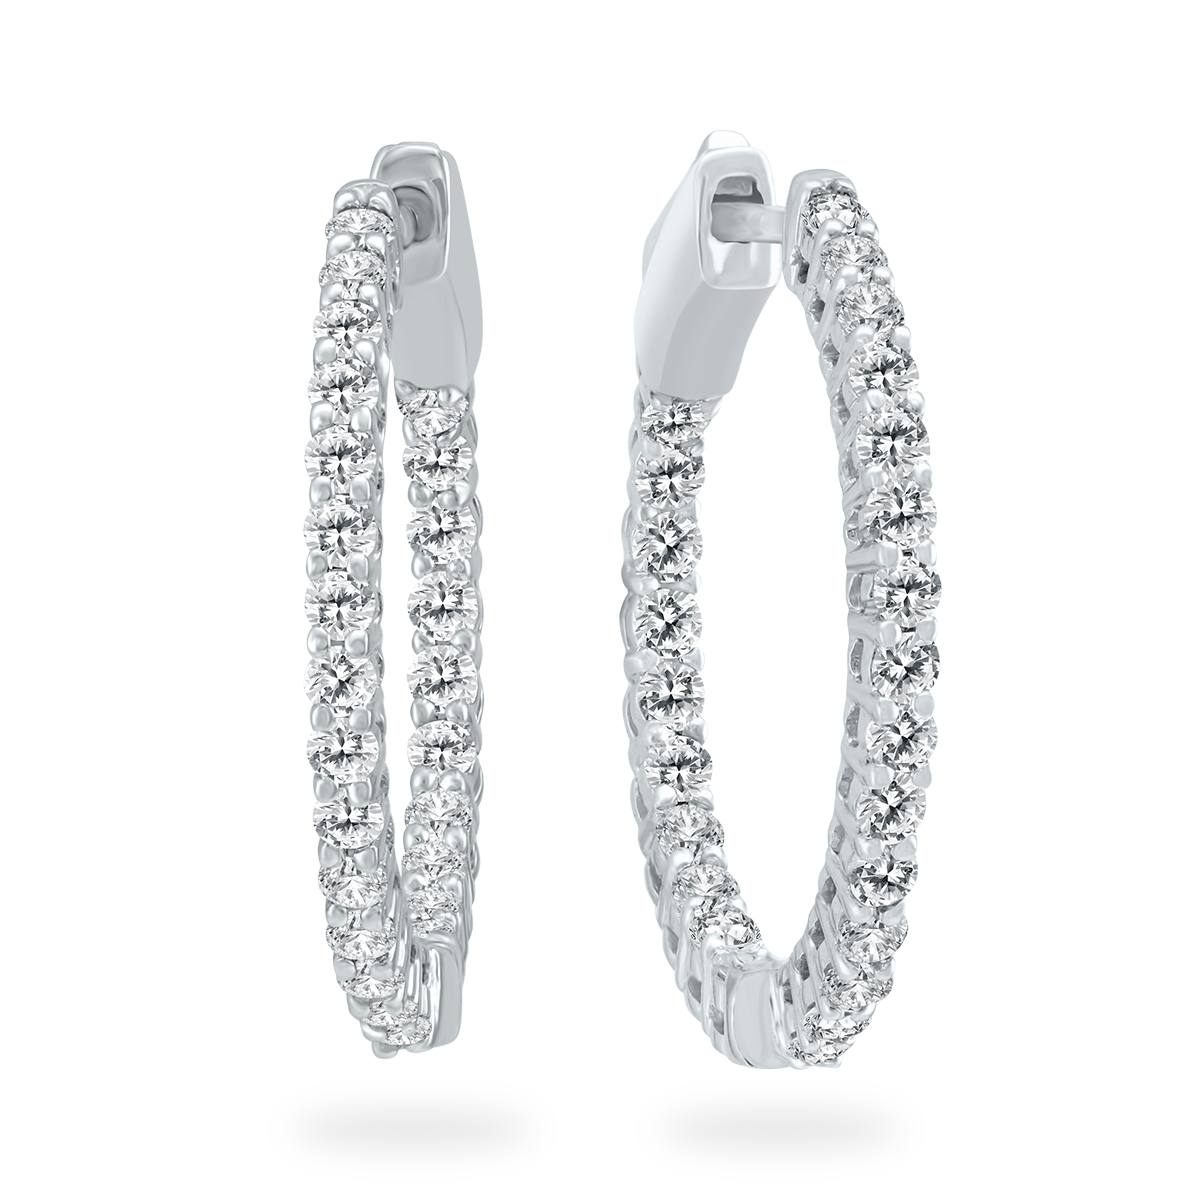 1 Carat TW Round Diamond Hoop Earrings with Push Down Button Lock in 14K White Gold